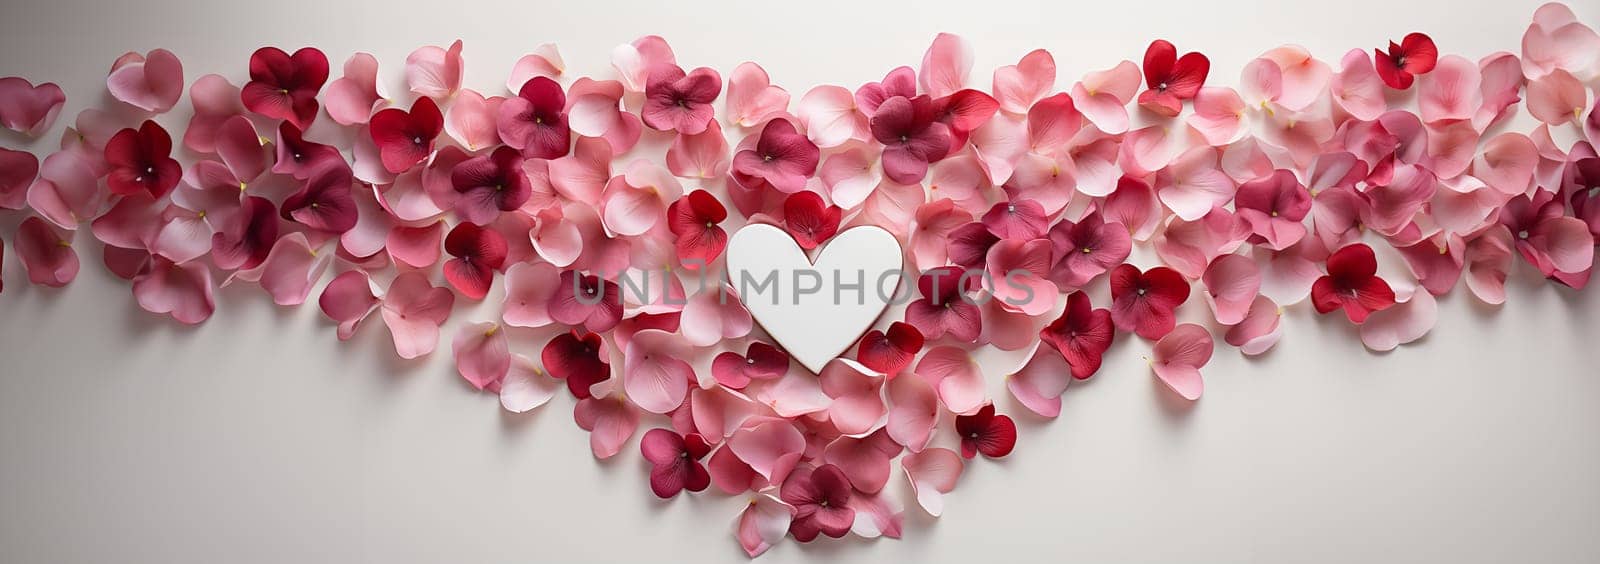 Romantic Valentine background, pink,red rose petals. Valentines Day Heart Made of Red Roses Isolated on White Background. by Annebel146